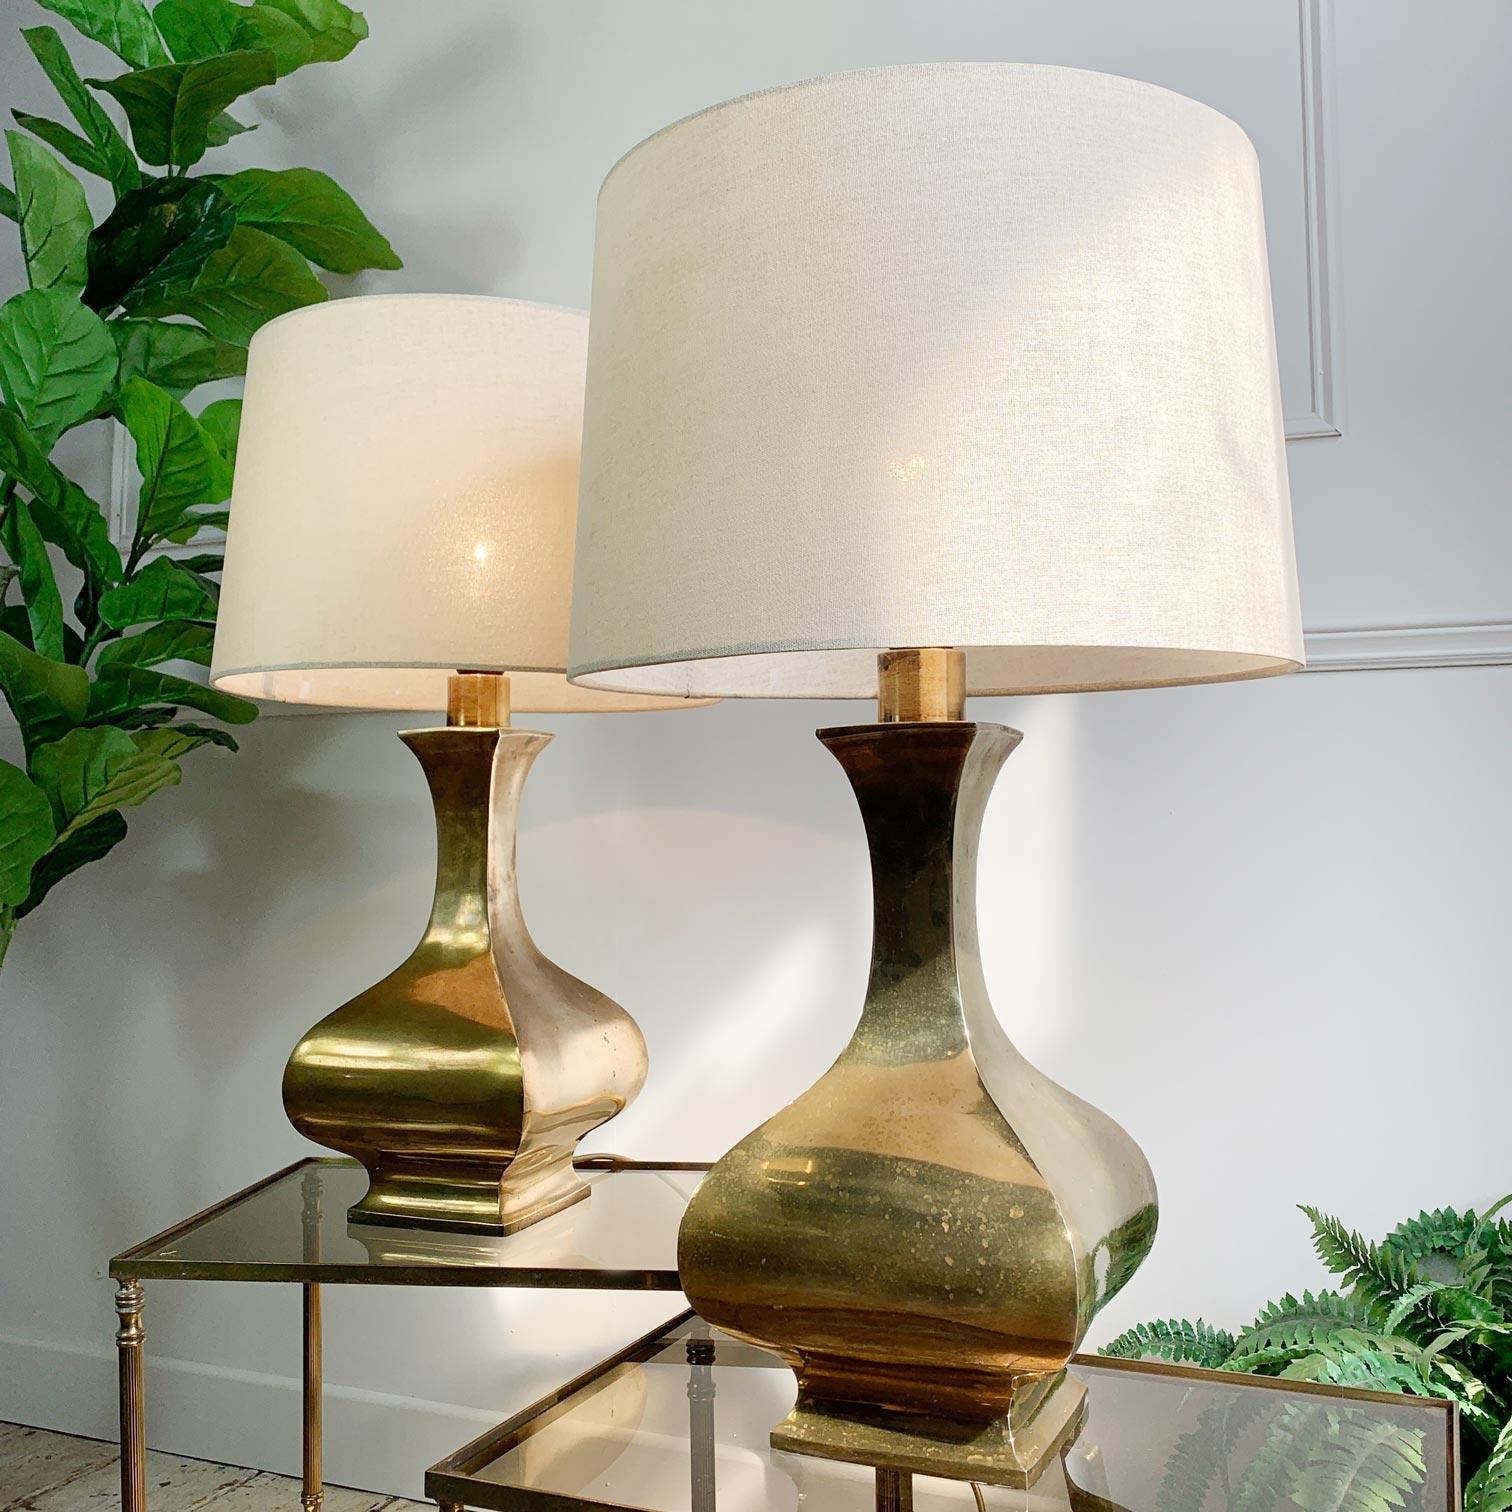 A very rare pair of 1970’s brass plated stainless steel Table lamps, designed by Maria Pergay. 

Born in 1930 in Moldova, Romania to Russian-Jewish parents, Pergay and her mother fled to France at the beginning of World War II. After the war,